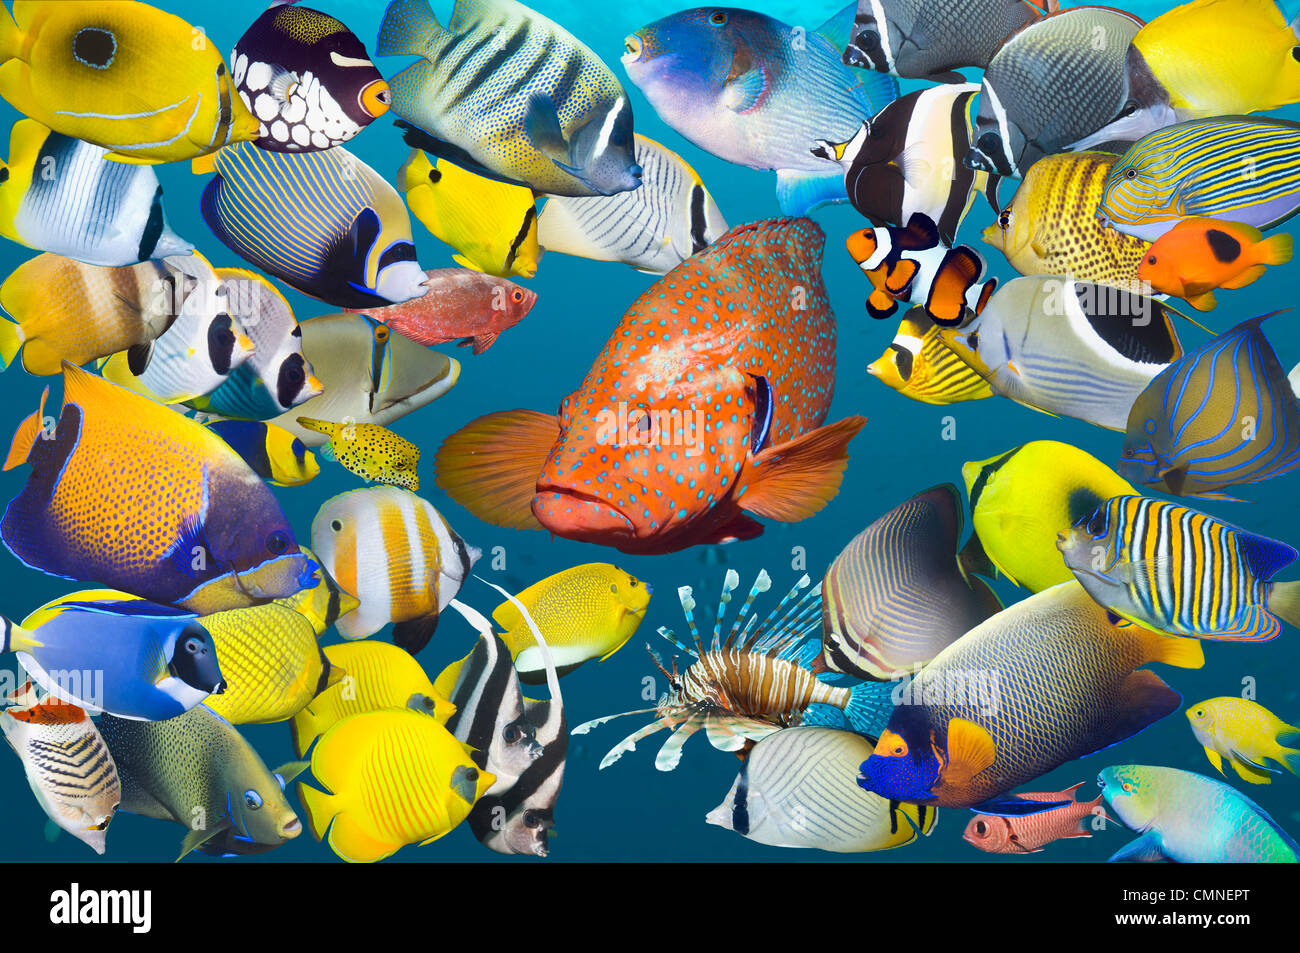 Montage of colourful tropical reef fish, with a Coral hind in centre. Stock Photo